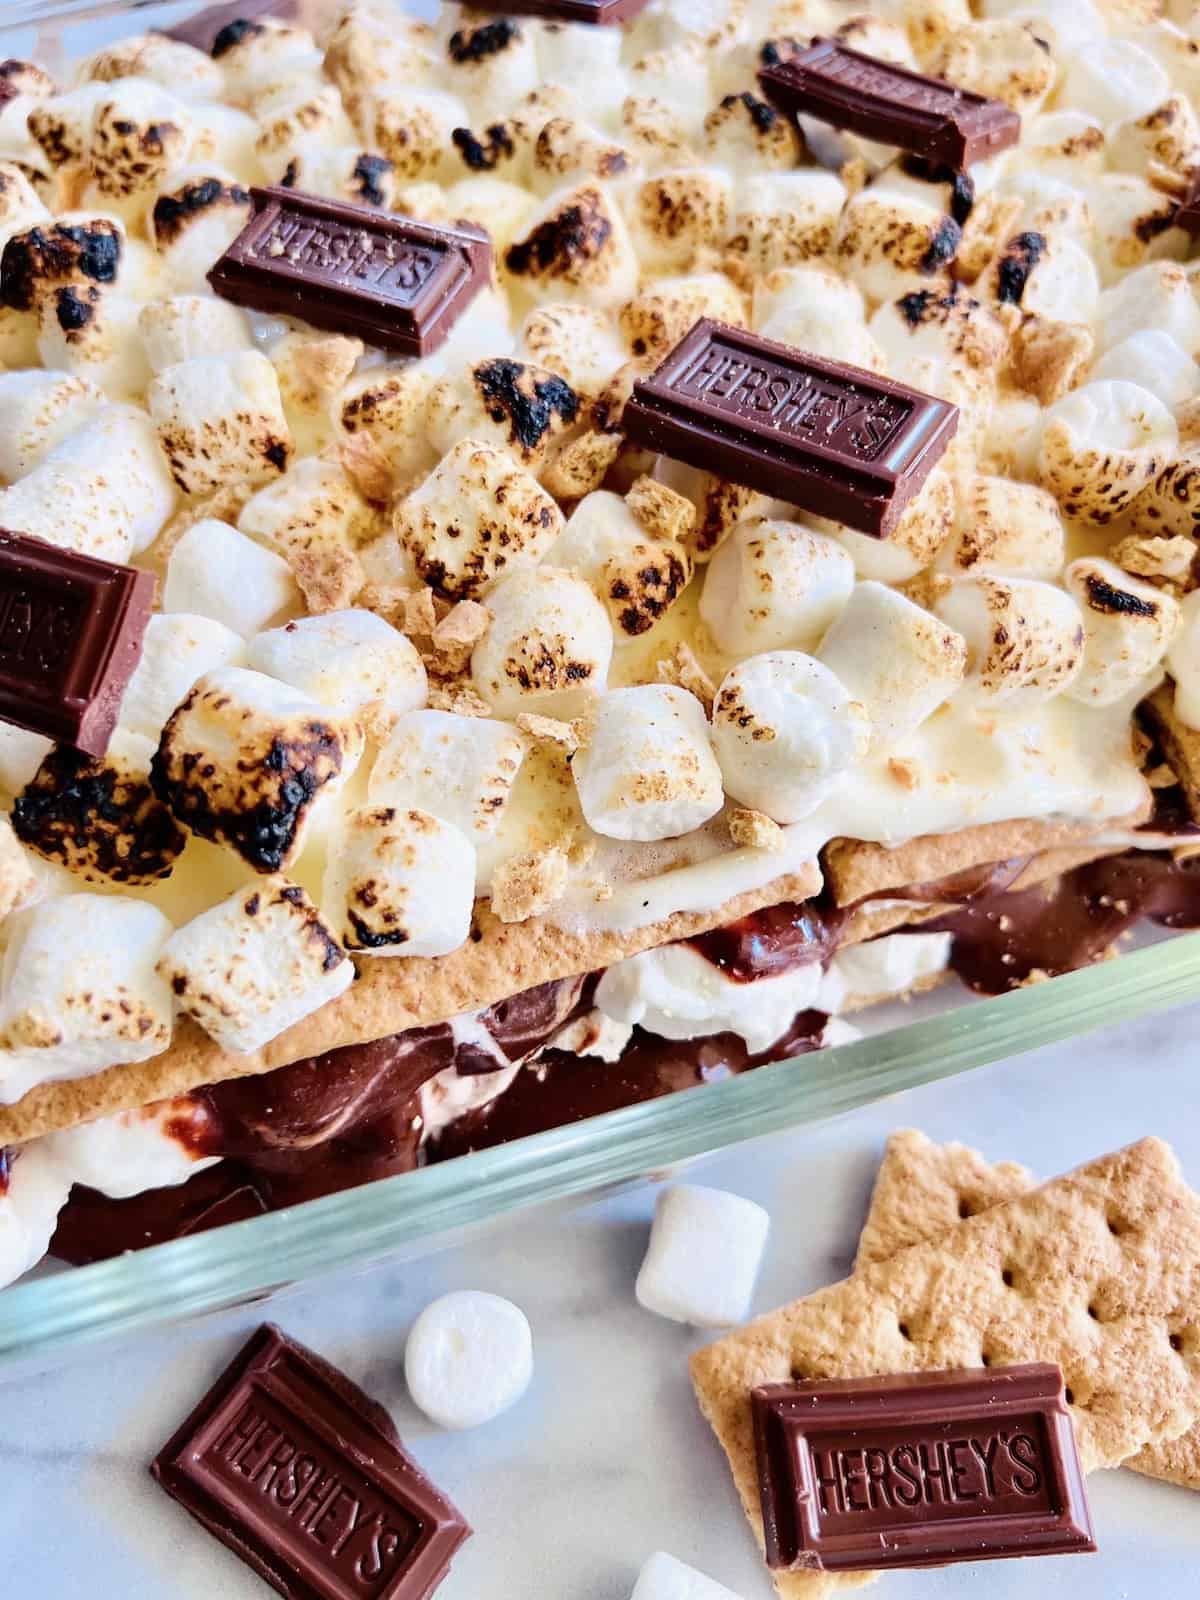 S’mores Icebox Cake with layers of chocolate pudding graham crackers and marshmallow cream.